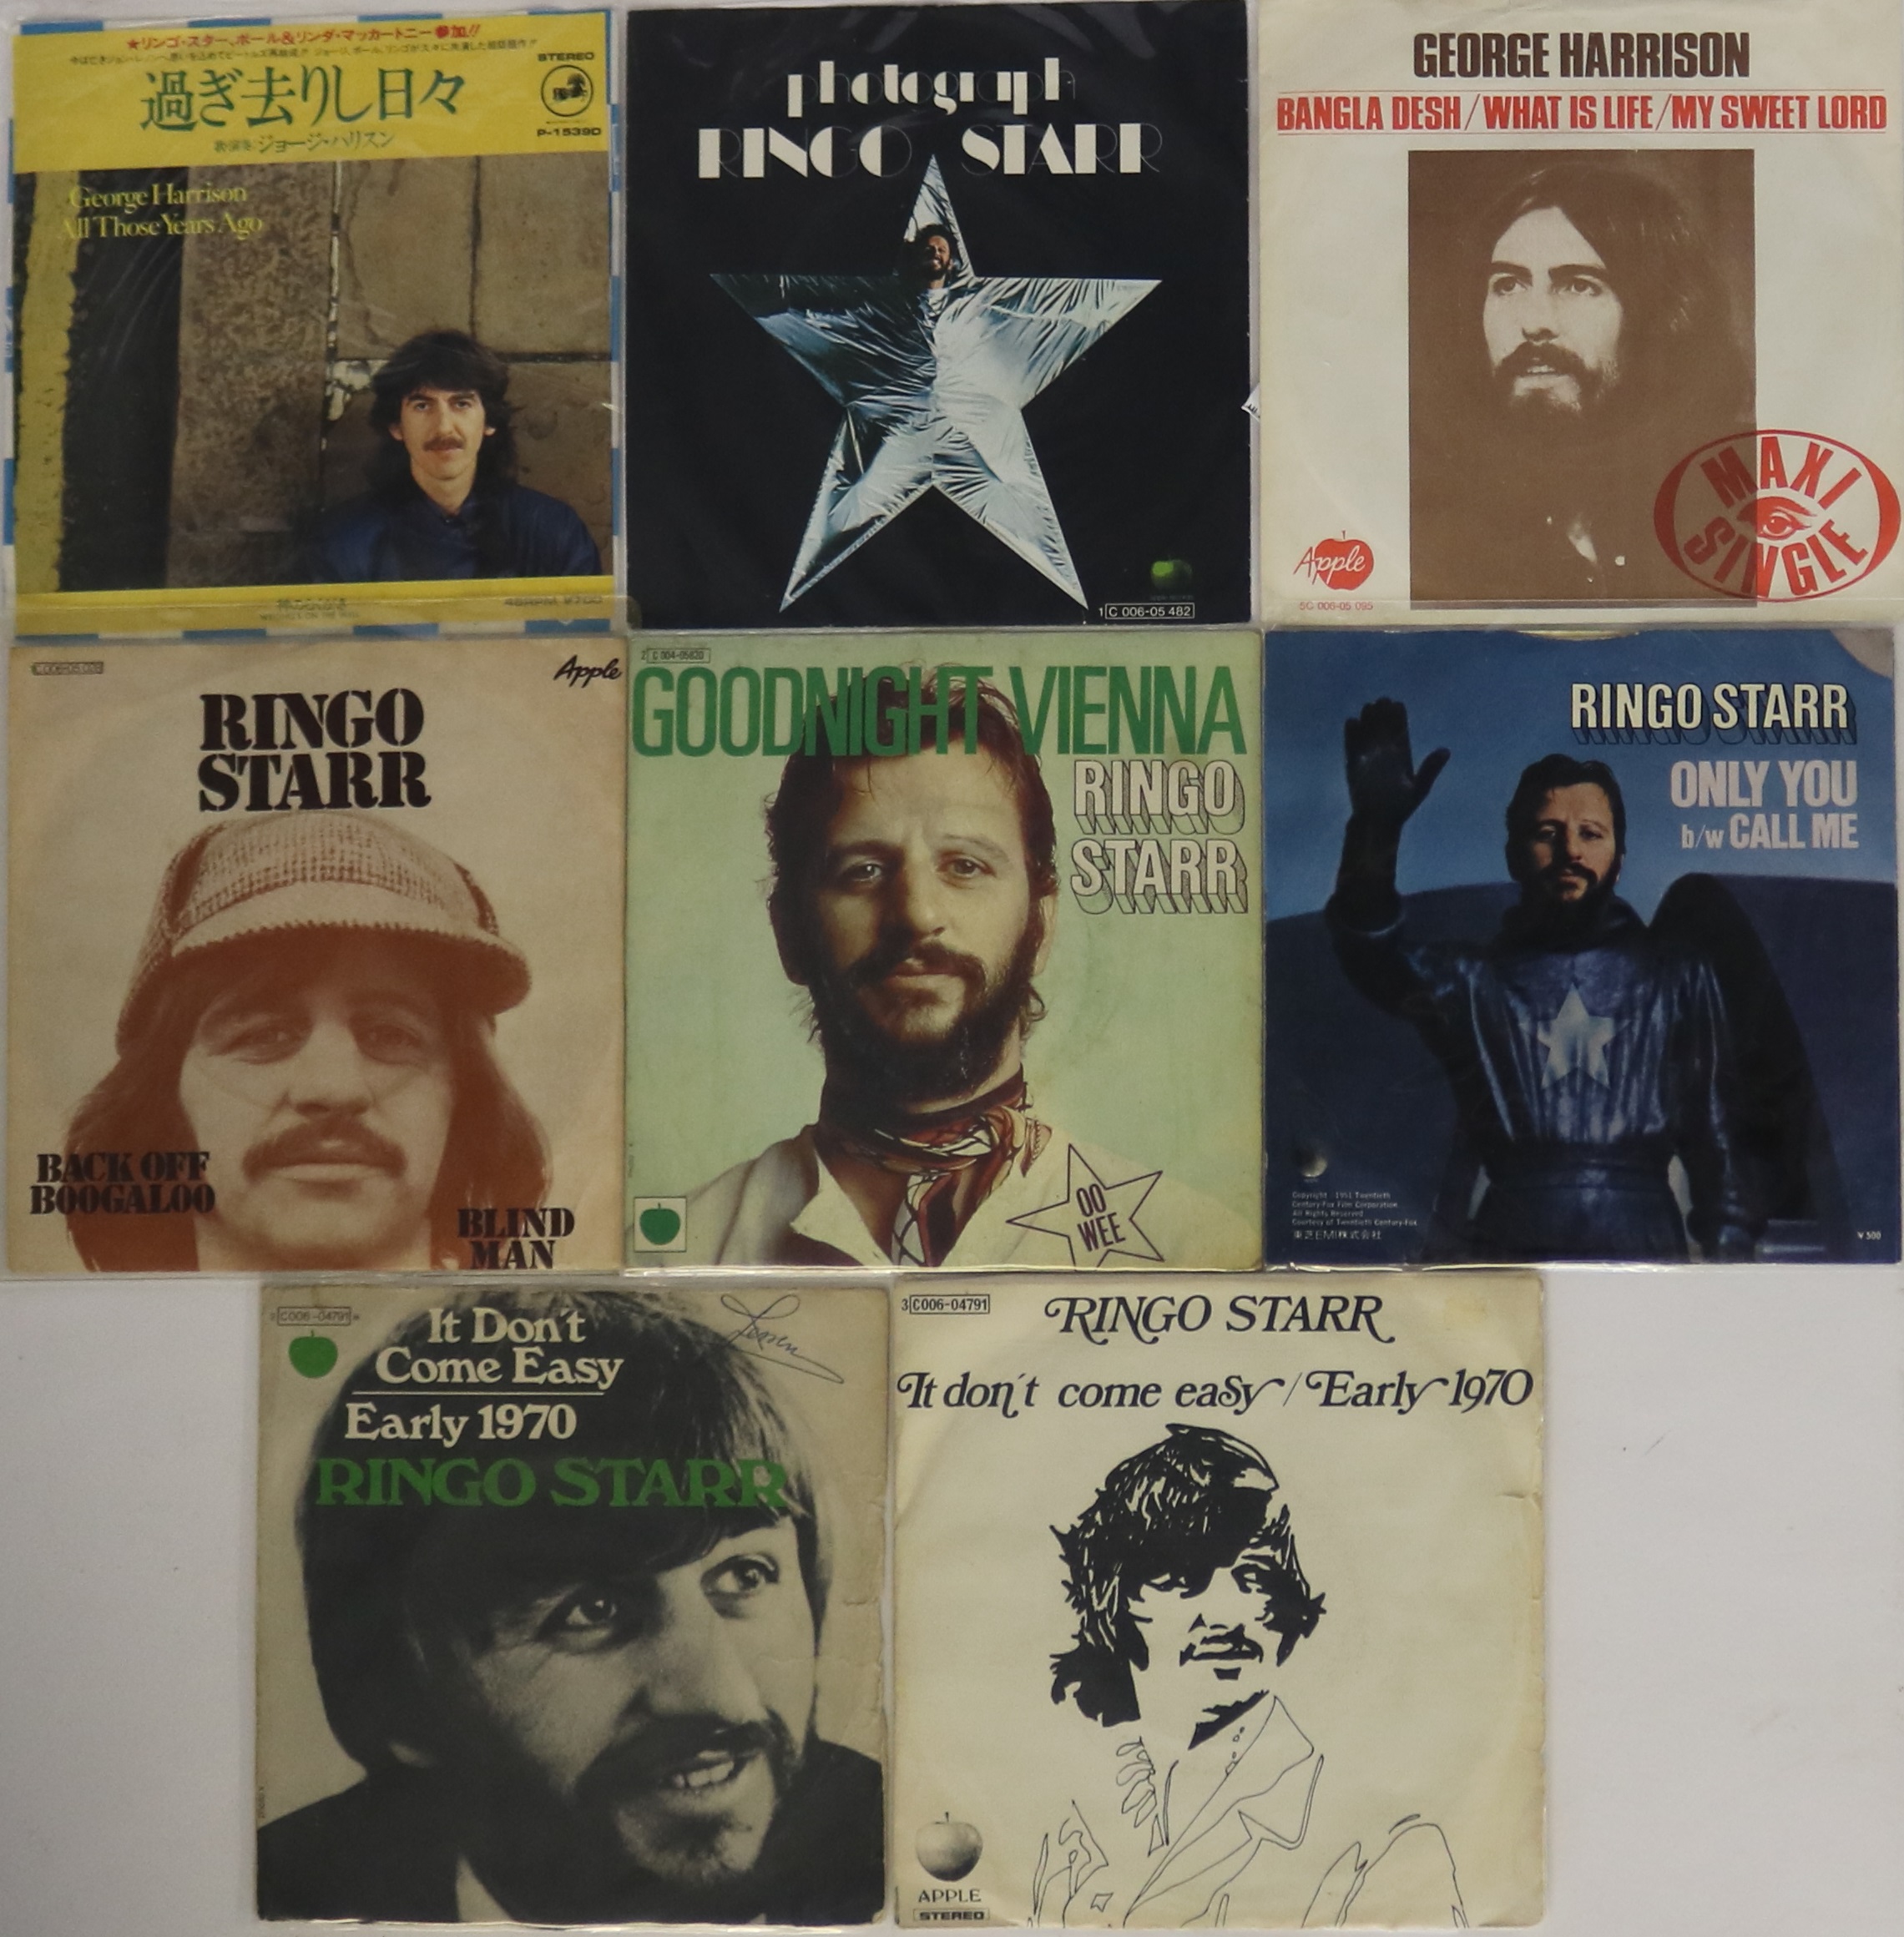 RINGO STARR - OVERSEAS 7" PICTURE SLEEVES - Ace selection of 20 x rarely seen overseas issued - Image 2 of 2